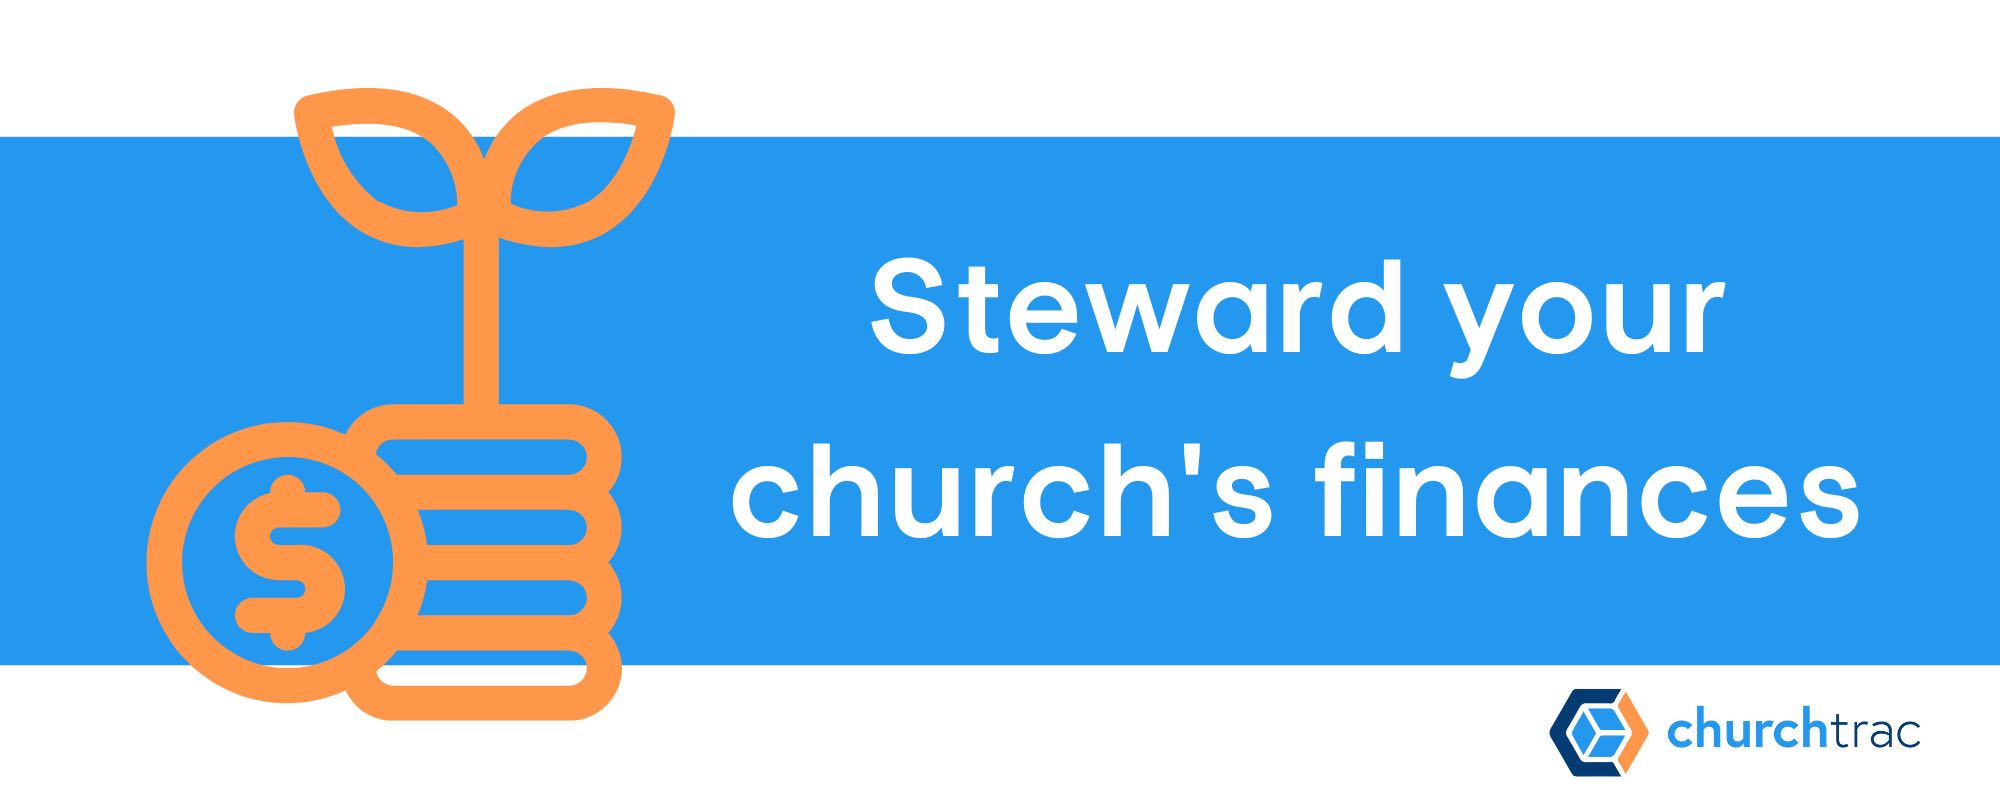 Steward your church's financial resources, no matter if you're a CPA or a volunteer church treasurer